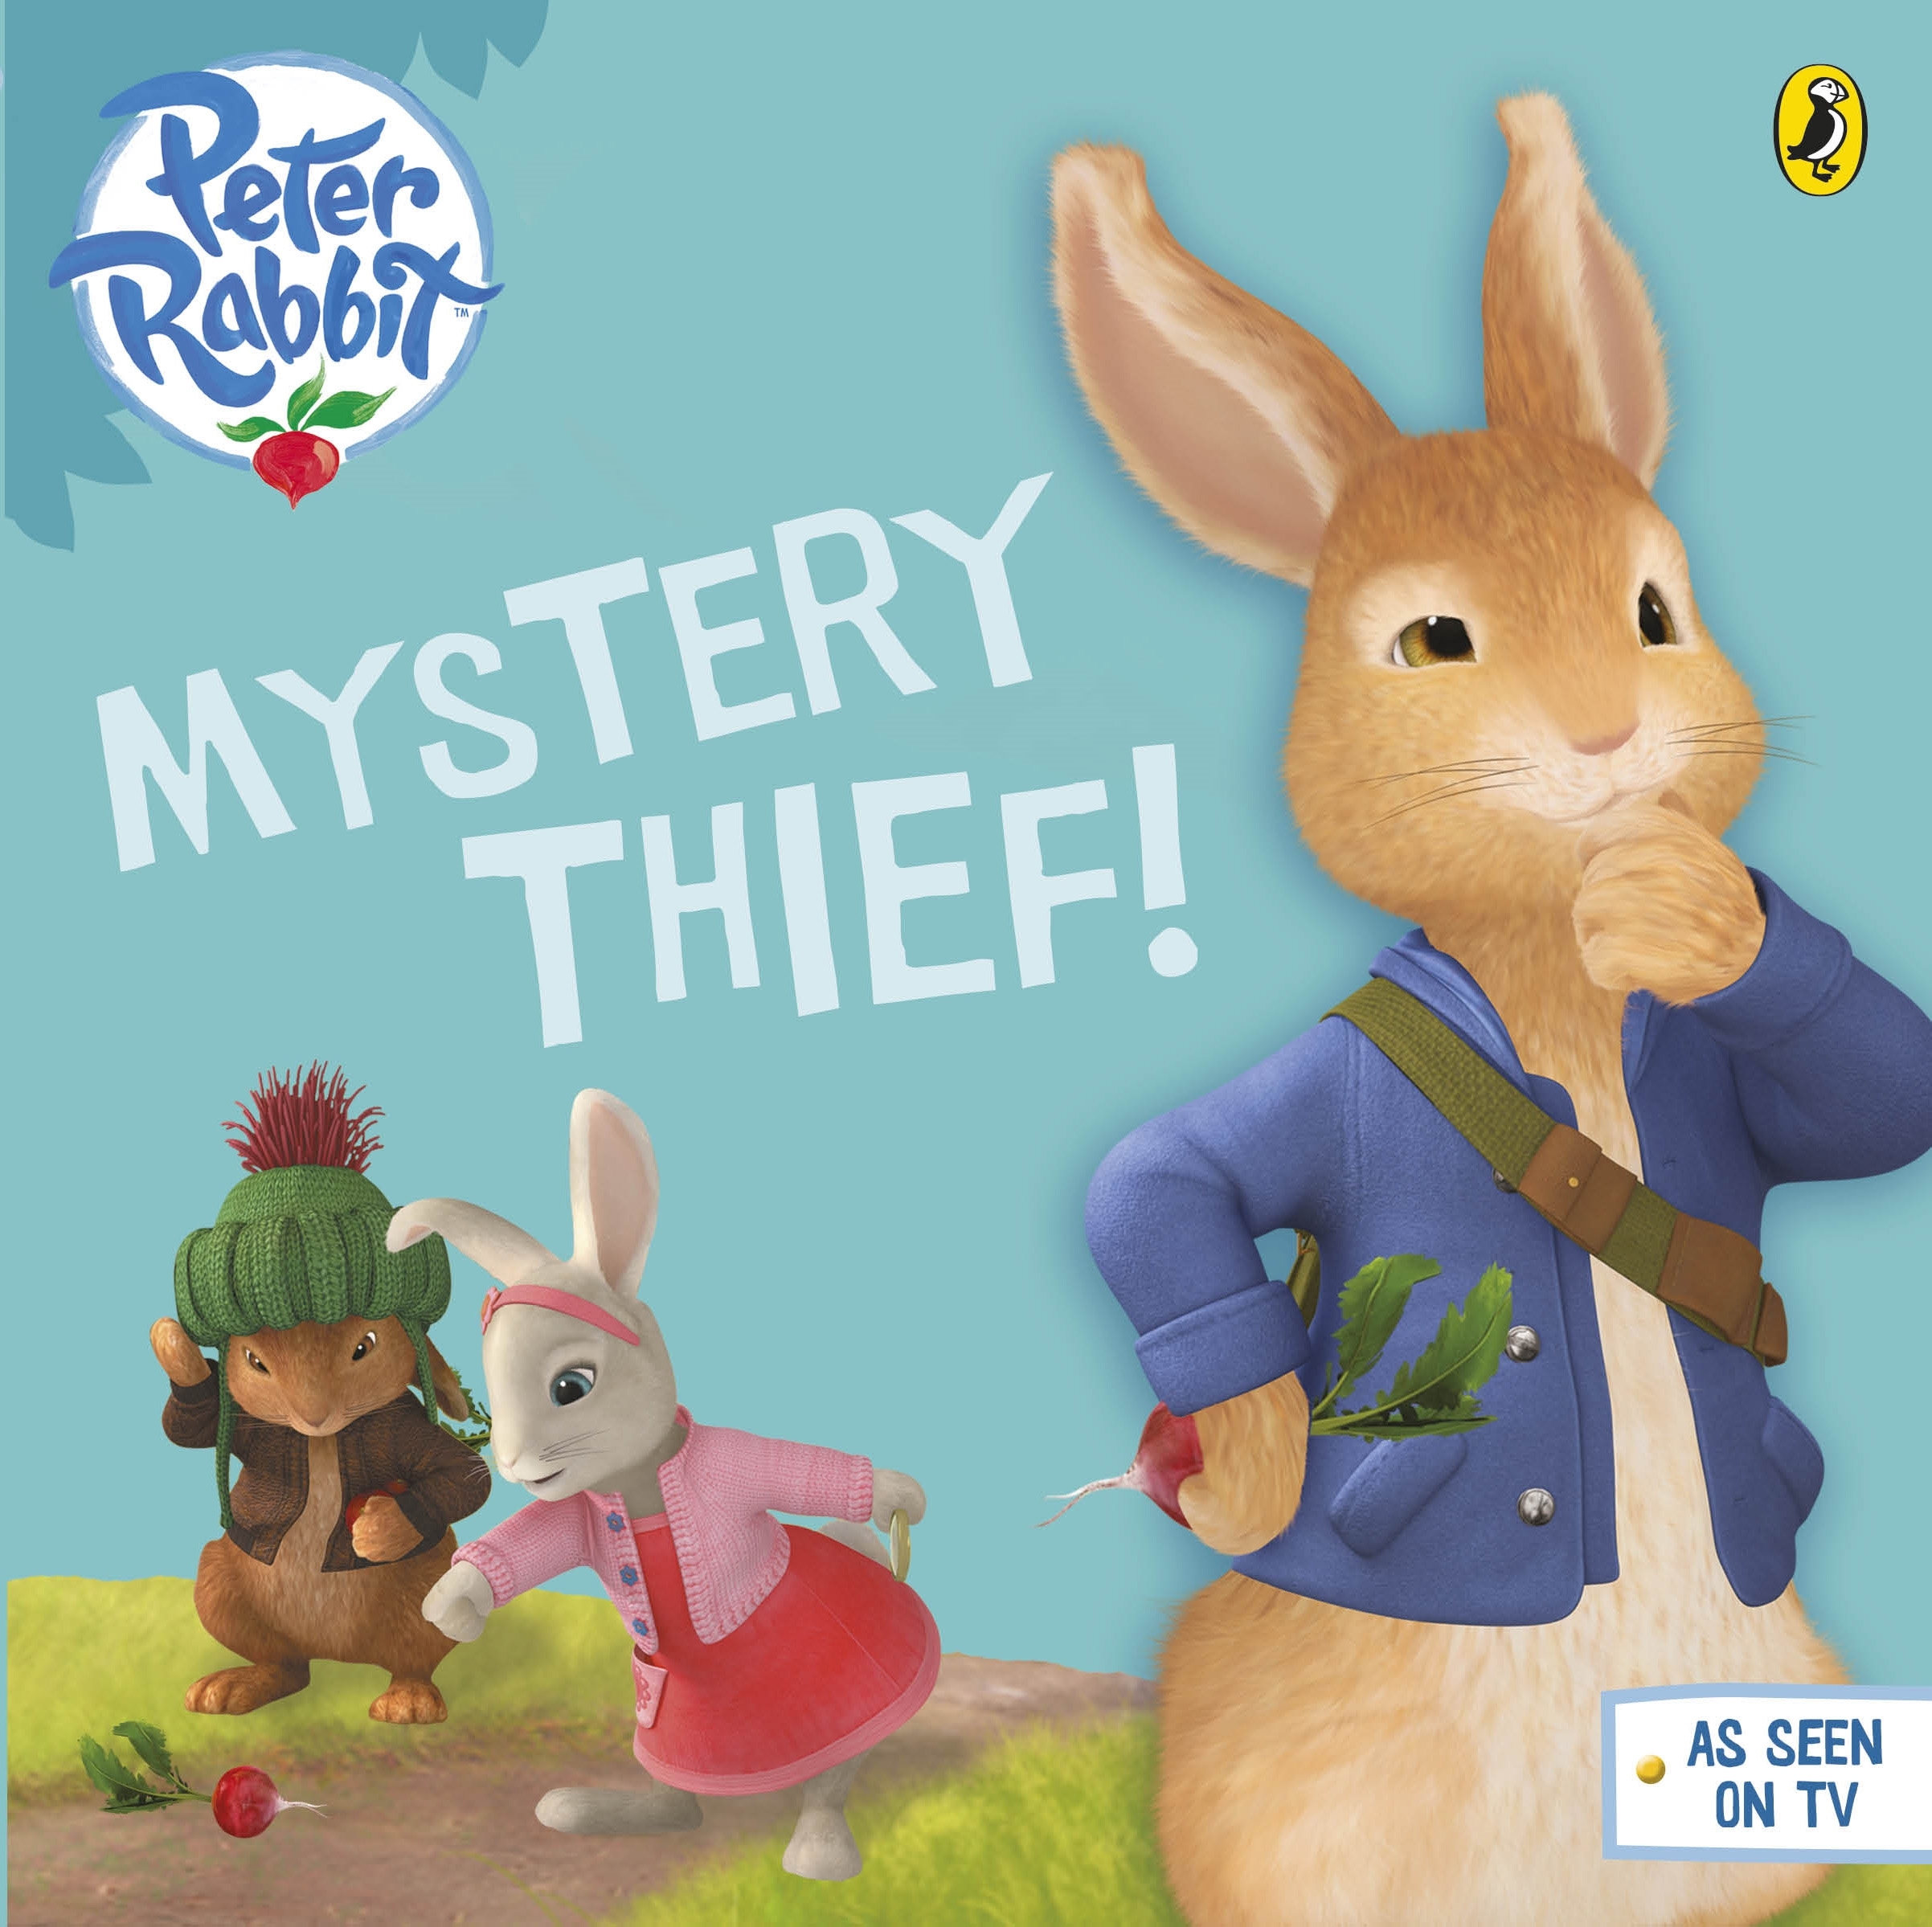 Peter Rabbit Animation: Mystery Thief! by Beatrix Potter - Penguin Books  New Zealand